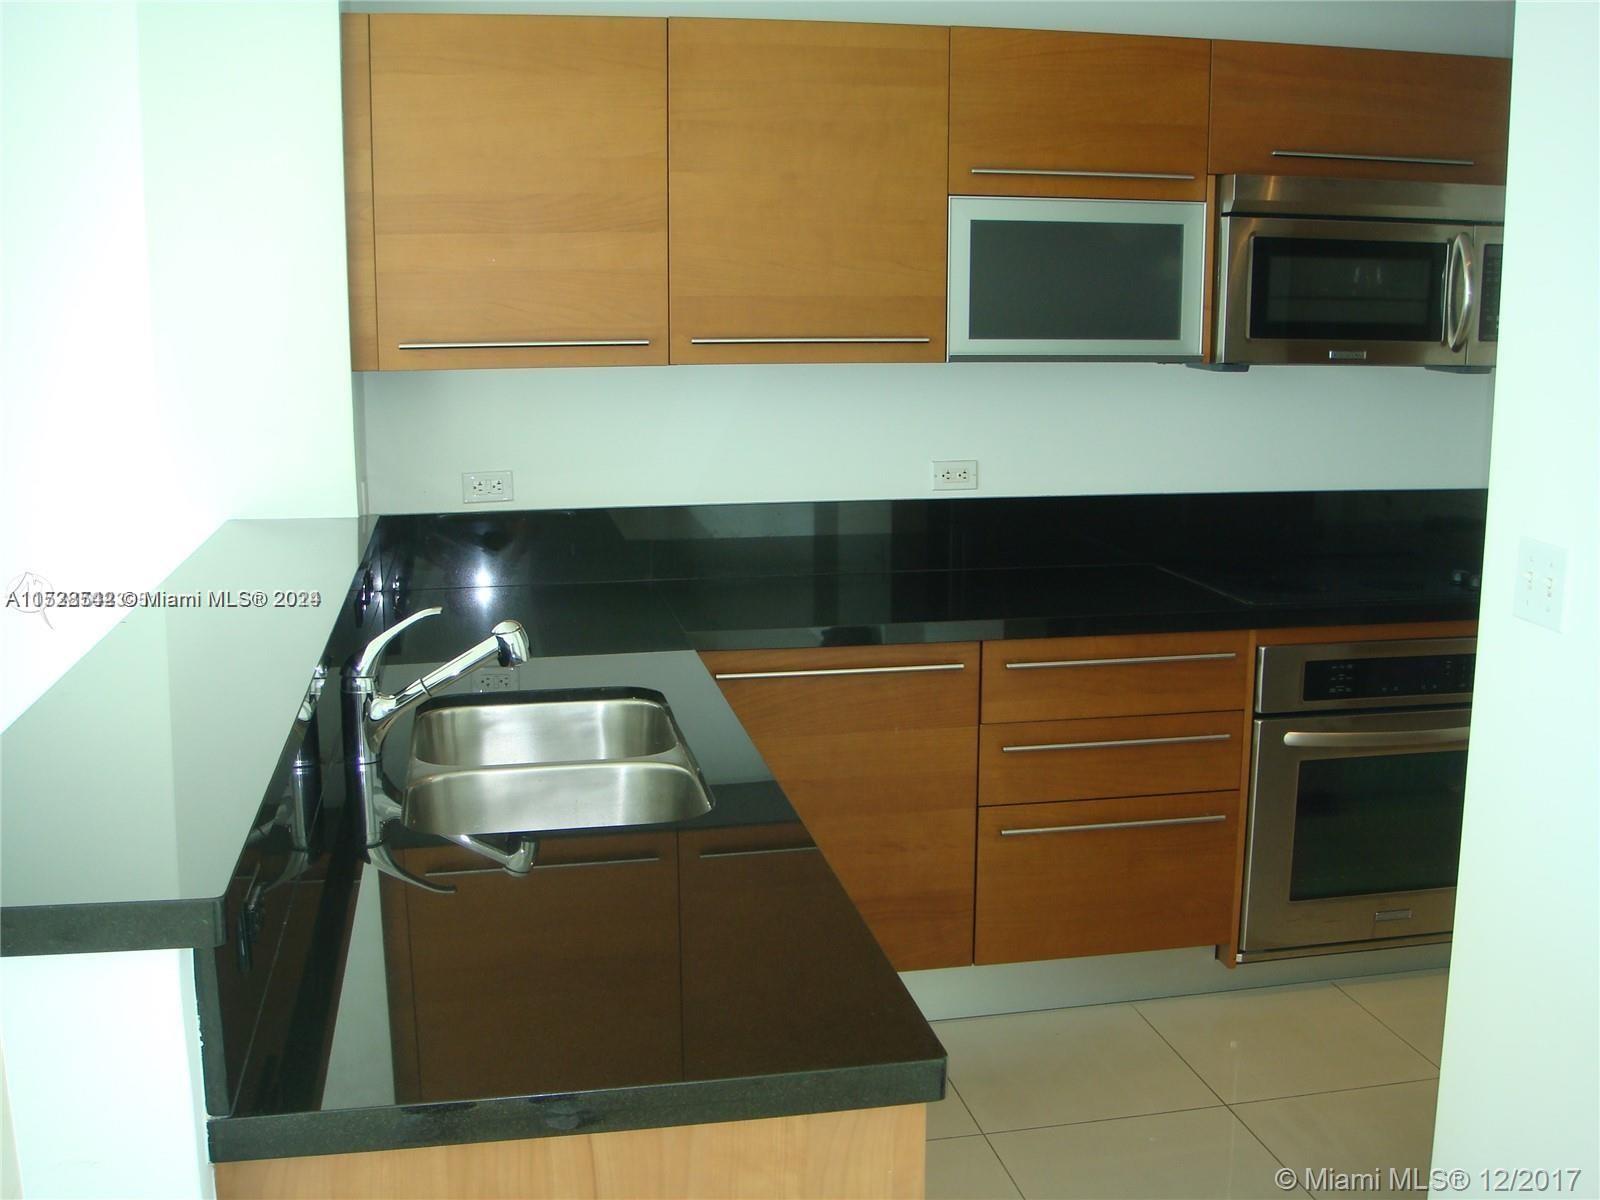 a kitchen with a sink and washing machine